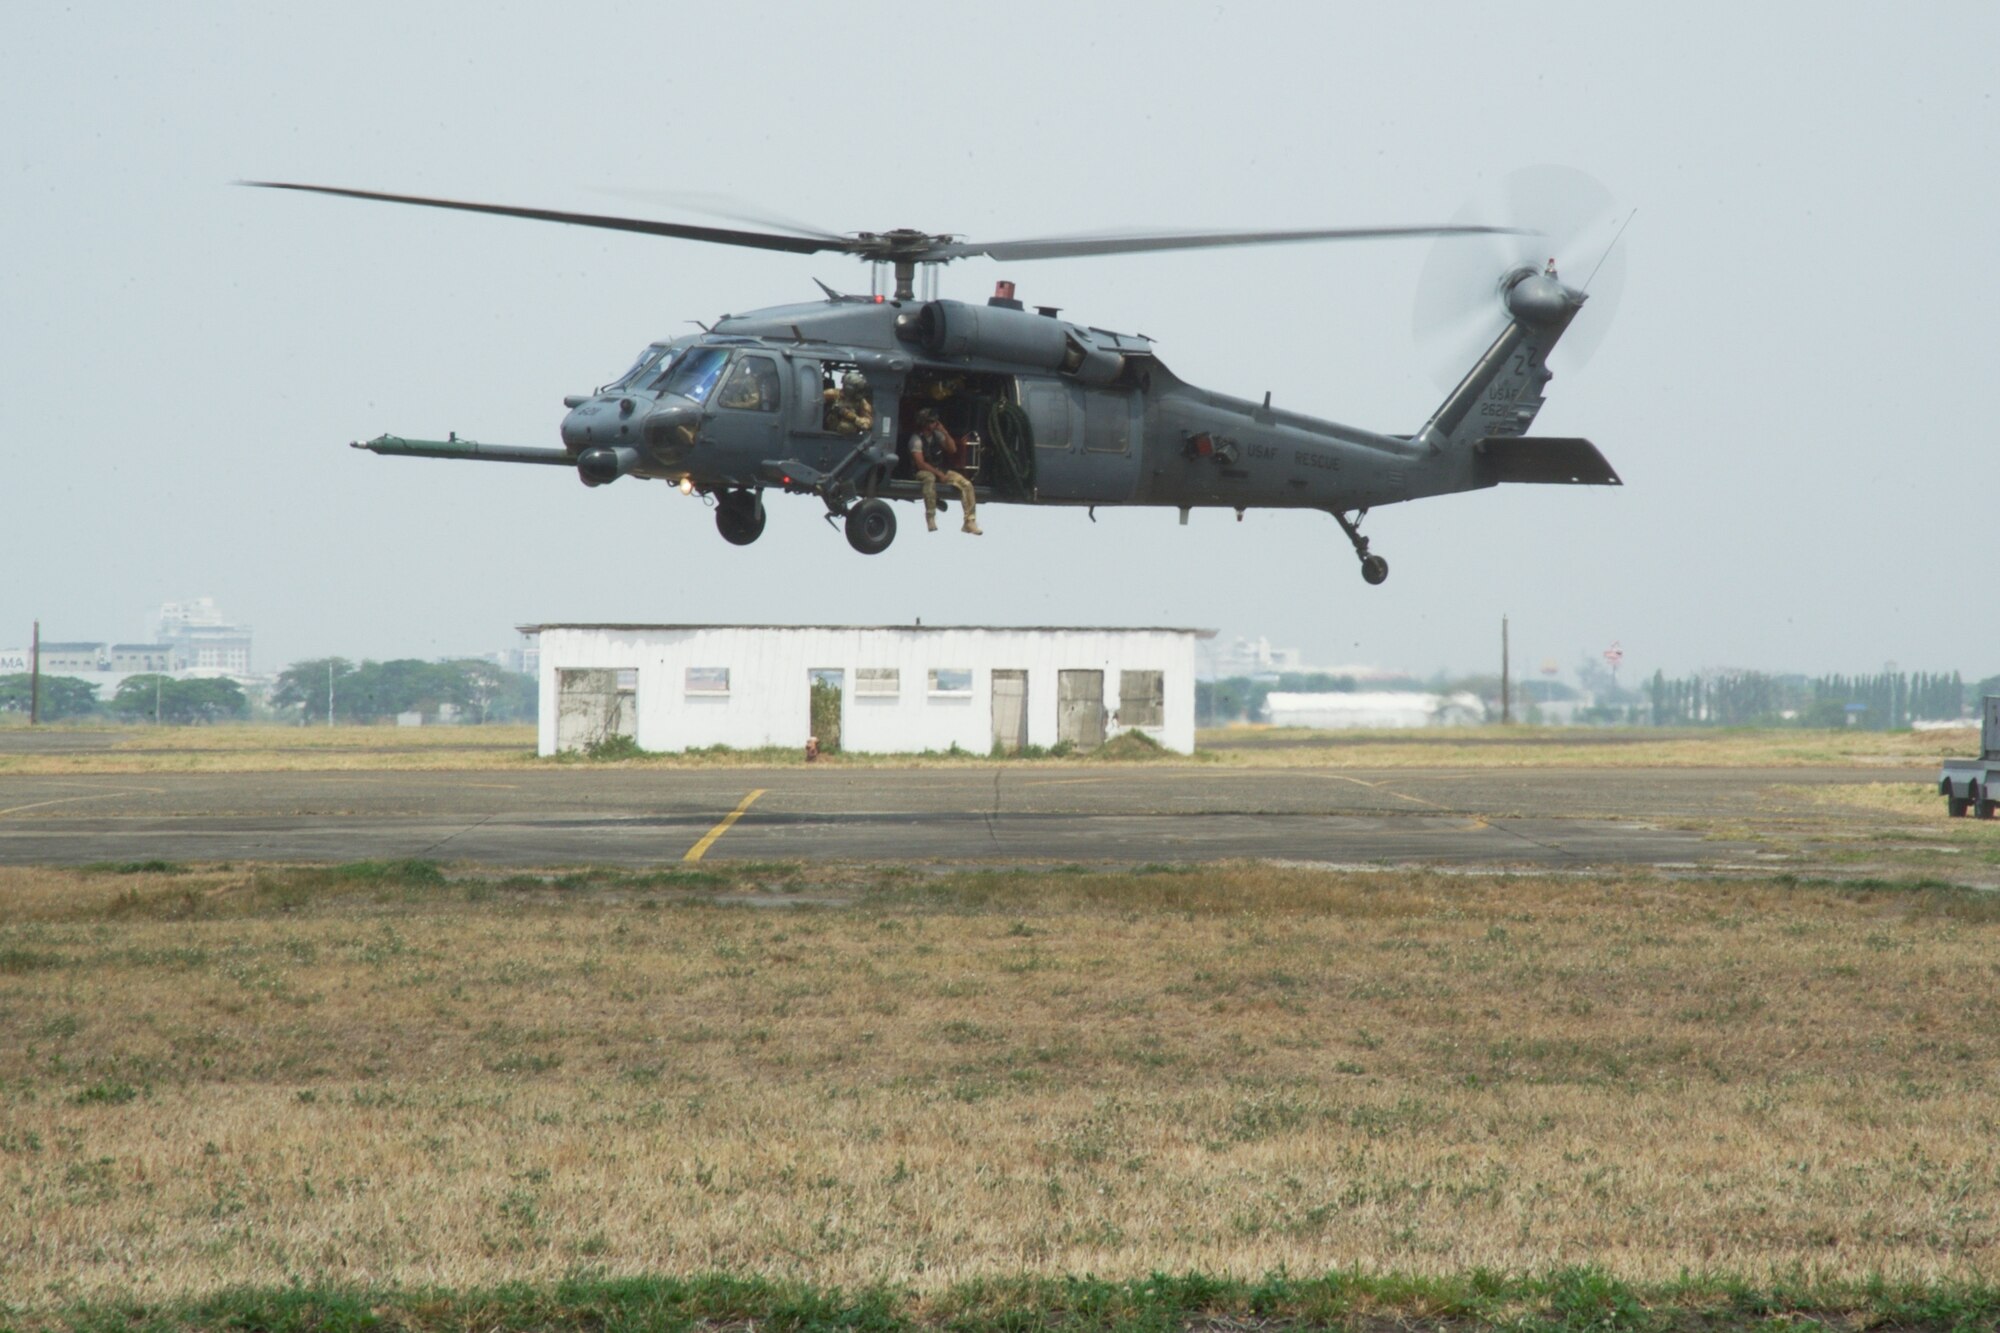 An HH-60G Pave Hawk prepares to land after completing the final mission for U.S. Pacific Command’s first iteration of an Air Contingent at Clark Air Base, Philippines, April 28, 2016. The Pave Hawks conducted a personnel recovery exercise in collaboration with the A-10s. These flights improved the interoperability between the two aircraft’s crews and ensures the pilots are qualified to conduct rescue operations. (U.S. Air Force Photo by Capt. Susan Harrington)